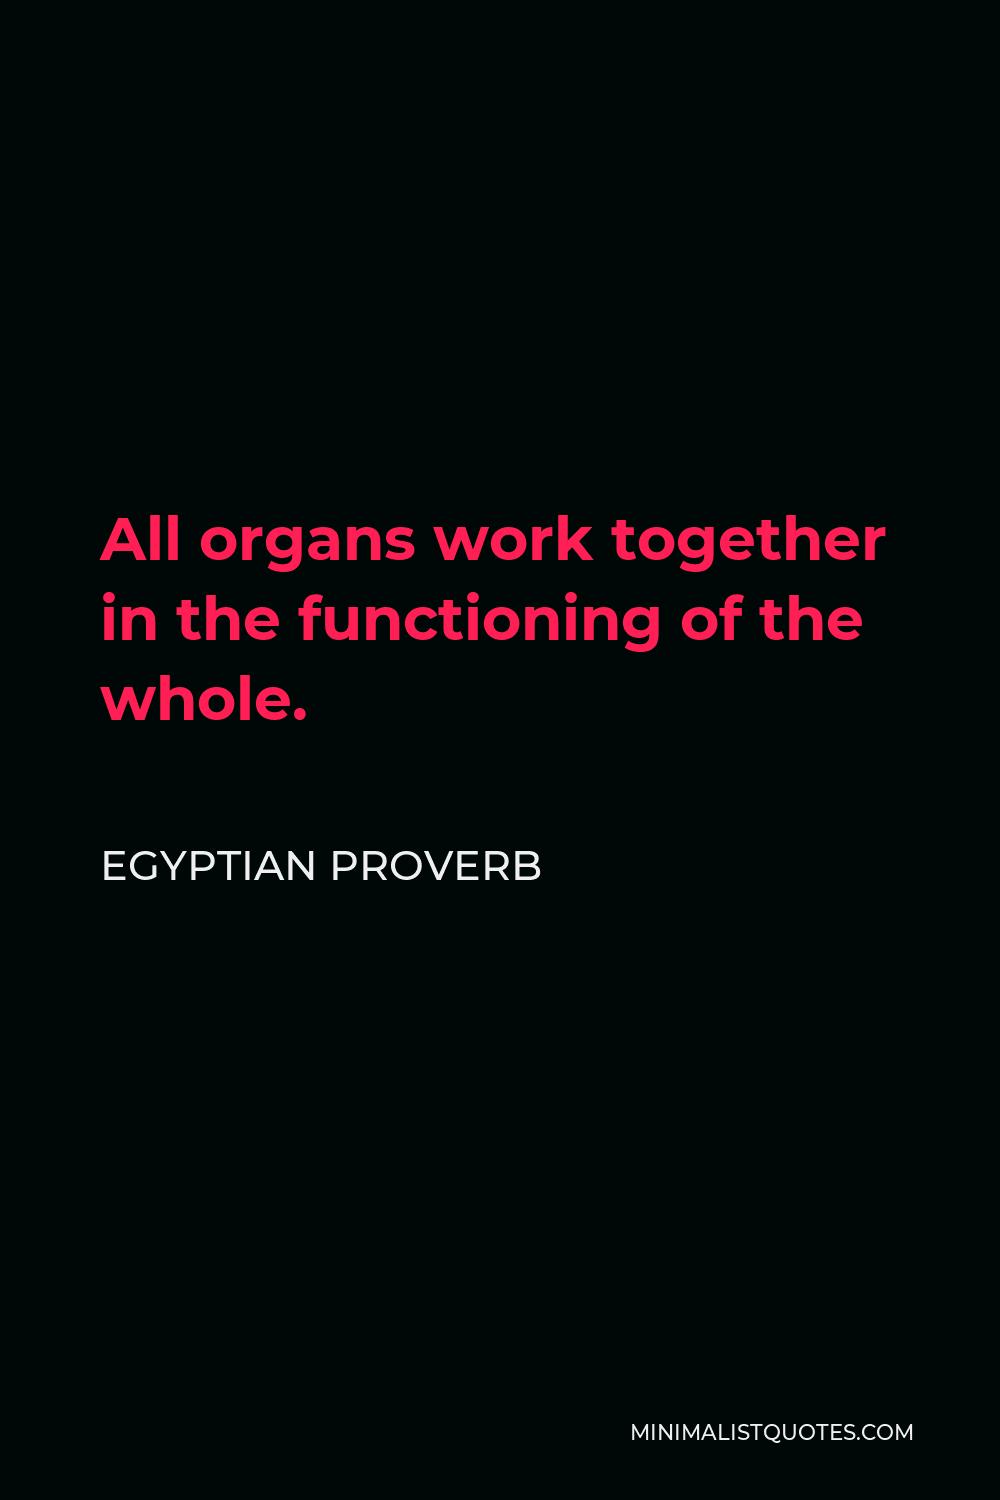 Egyptian Proverb Quote - All organs work together in the functioning of the whole.